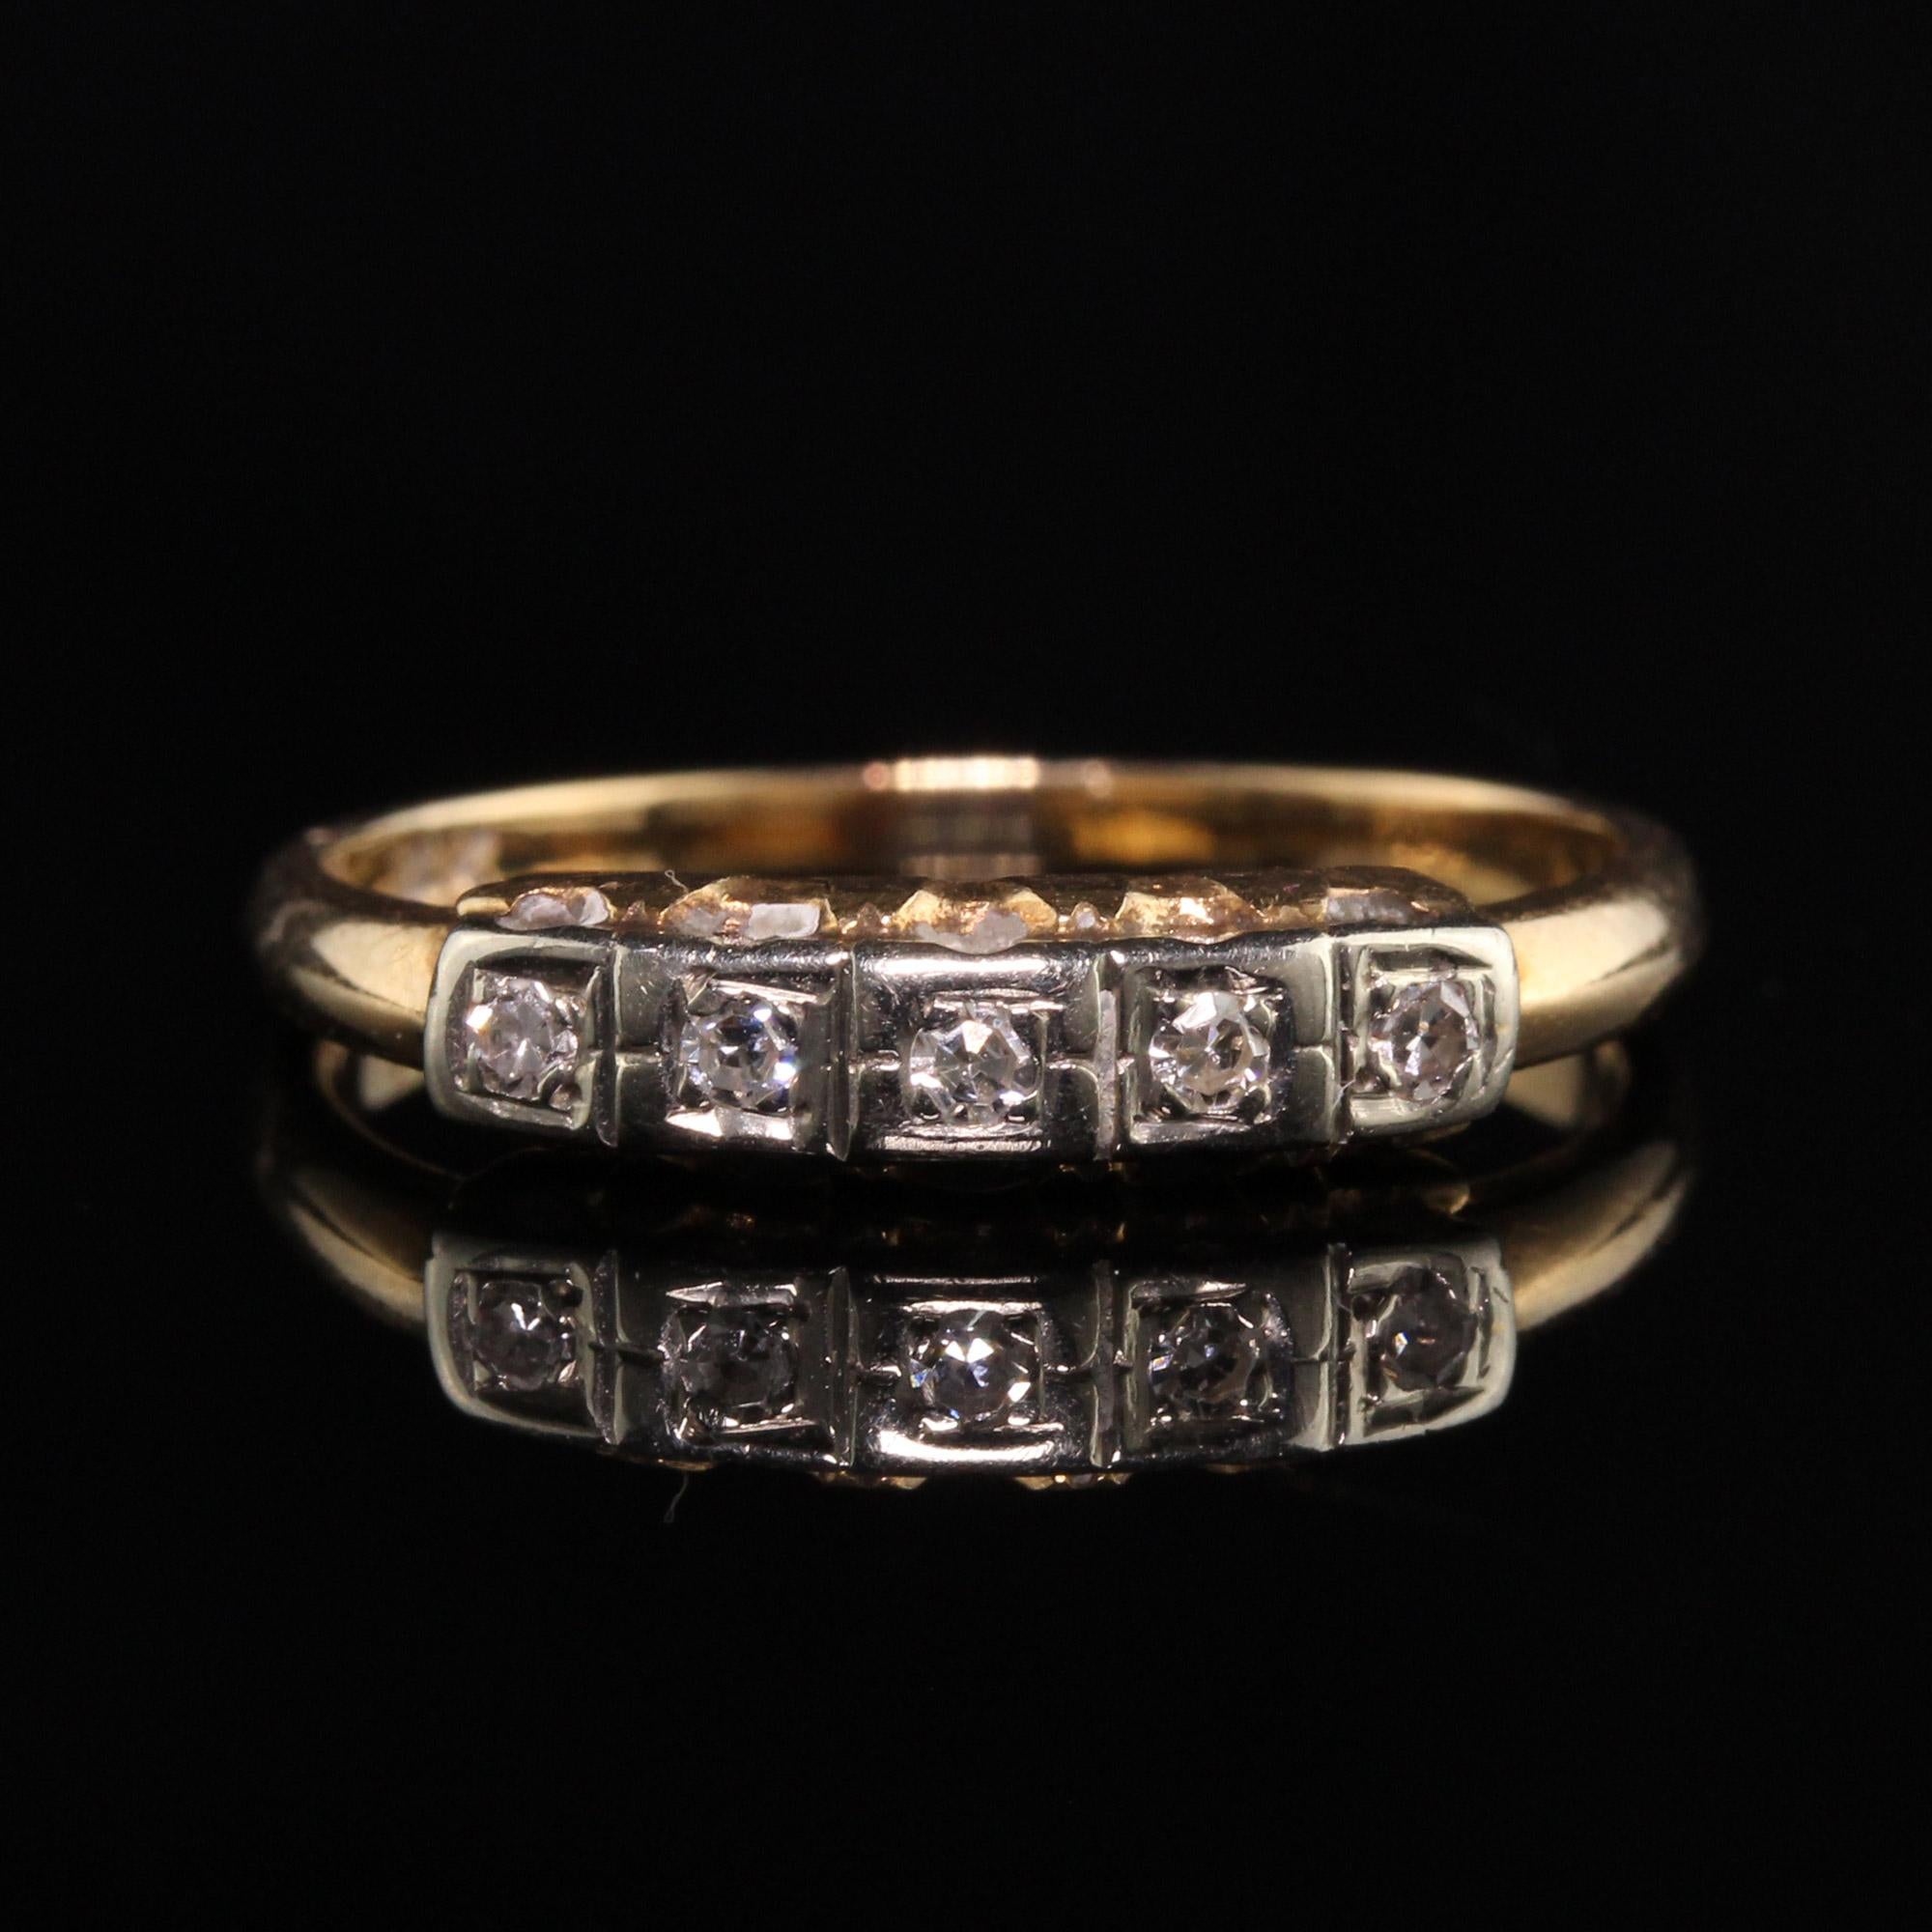 Antique Art Deco 14K Yellow Gold Five Stone Single Cut Diamond Wedding Band In Good Condition For Sale In Great Neck, NY